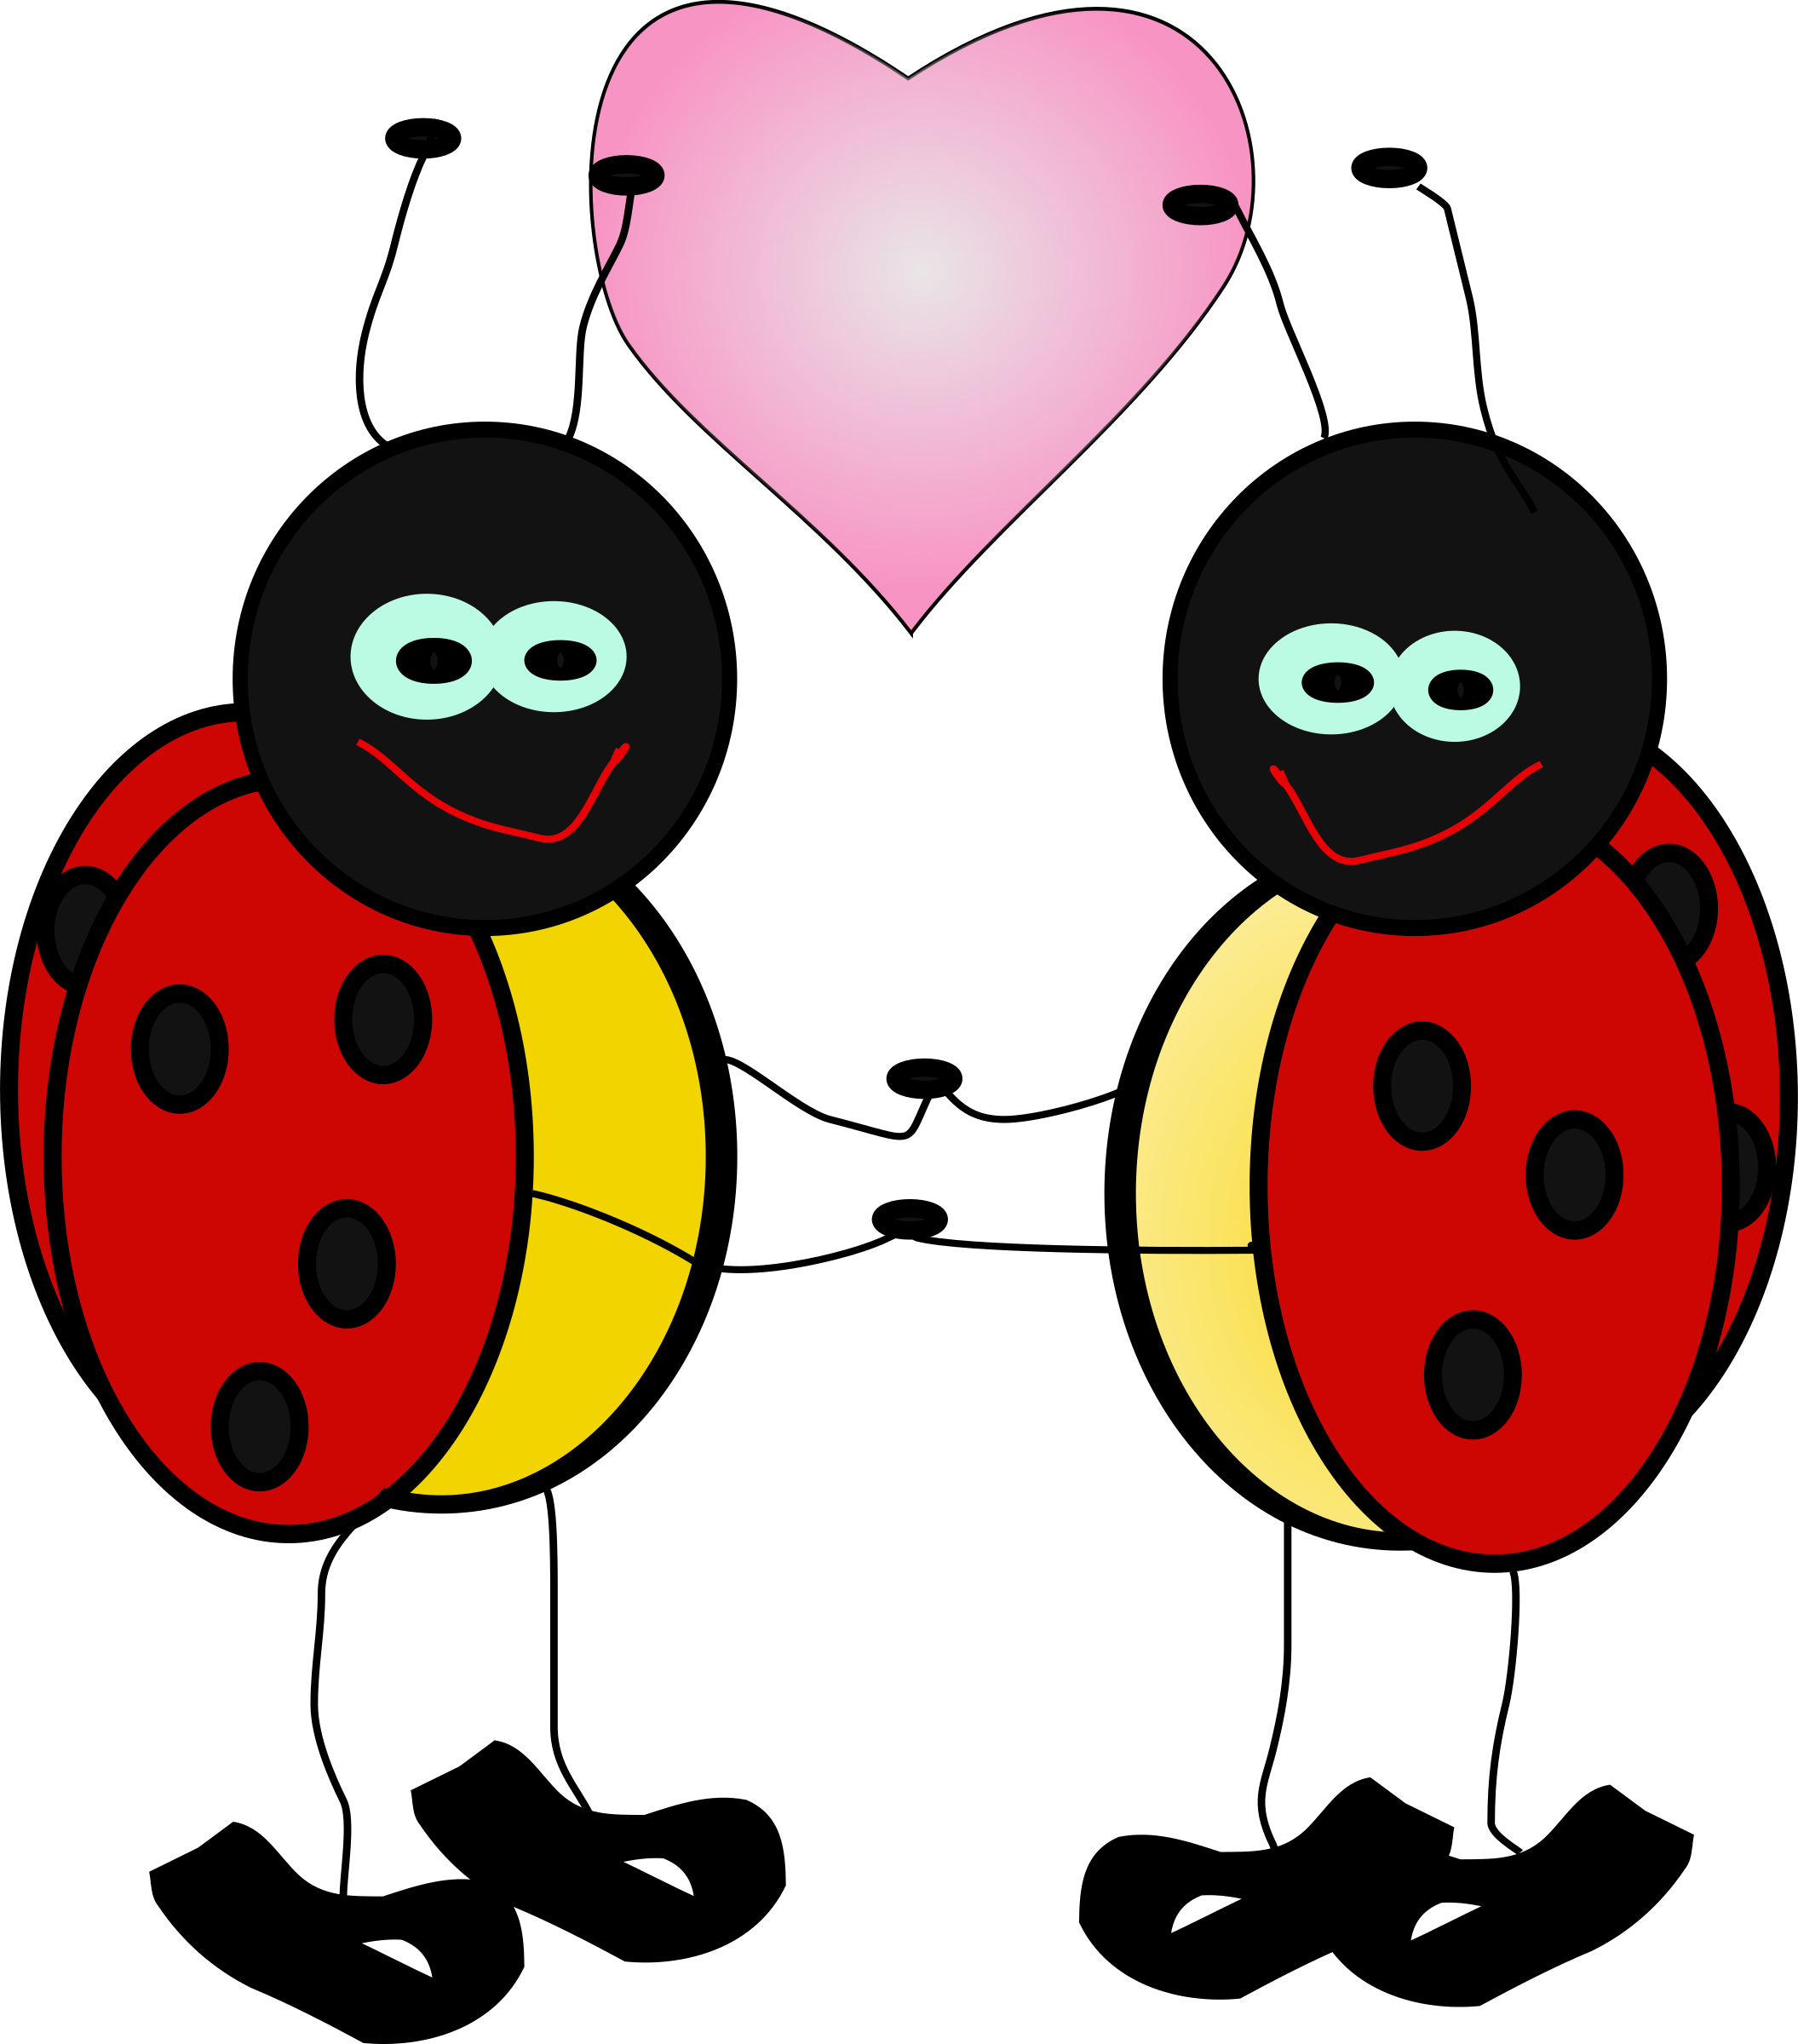 Ladybug PNG, Clipart, Beetle, Cartoon, Insect, Ladybug, Pest Free PNG  Download